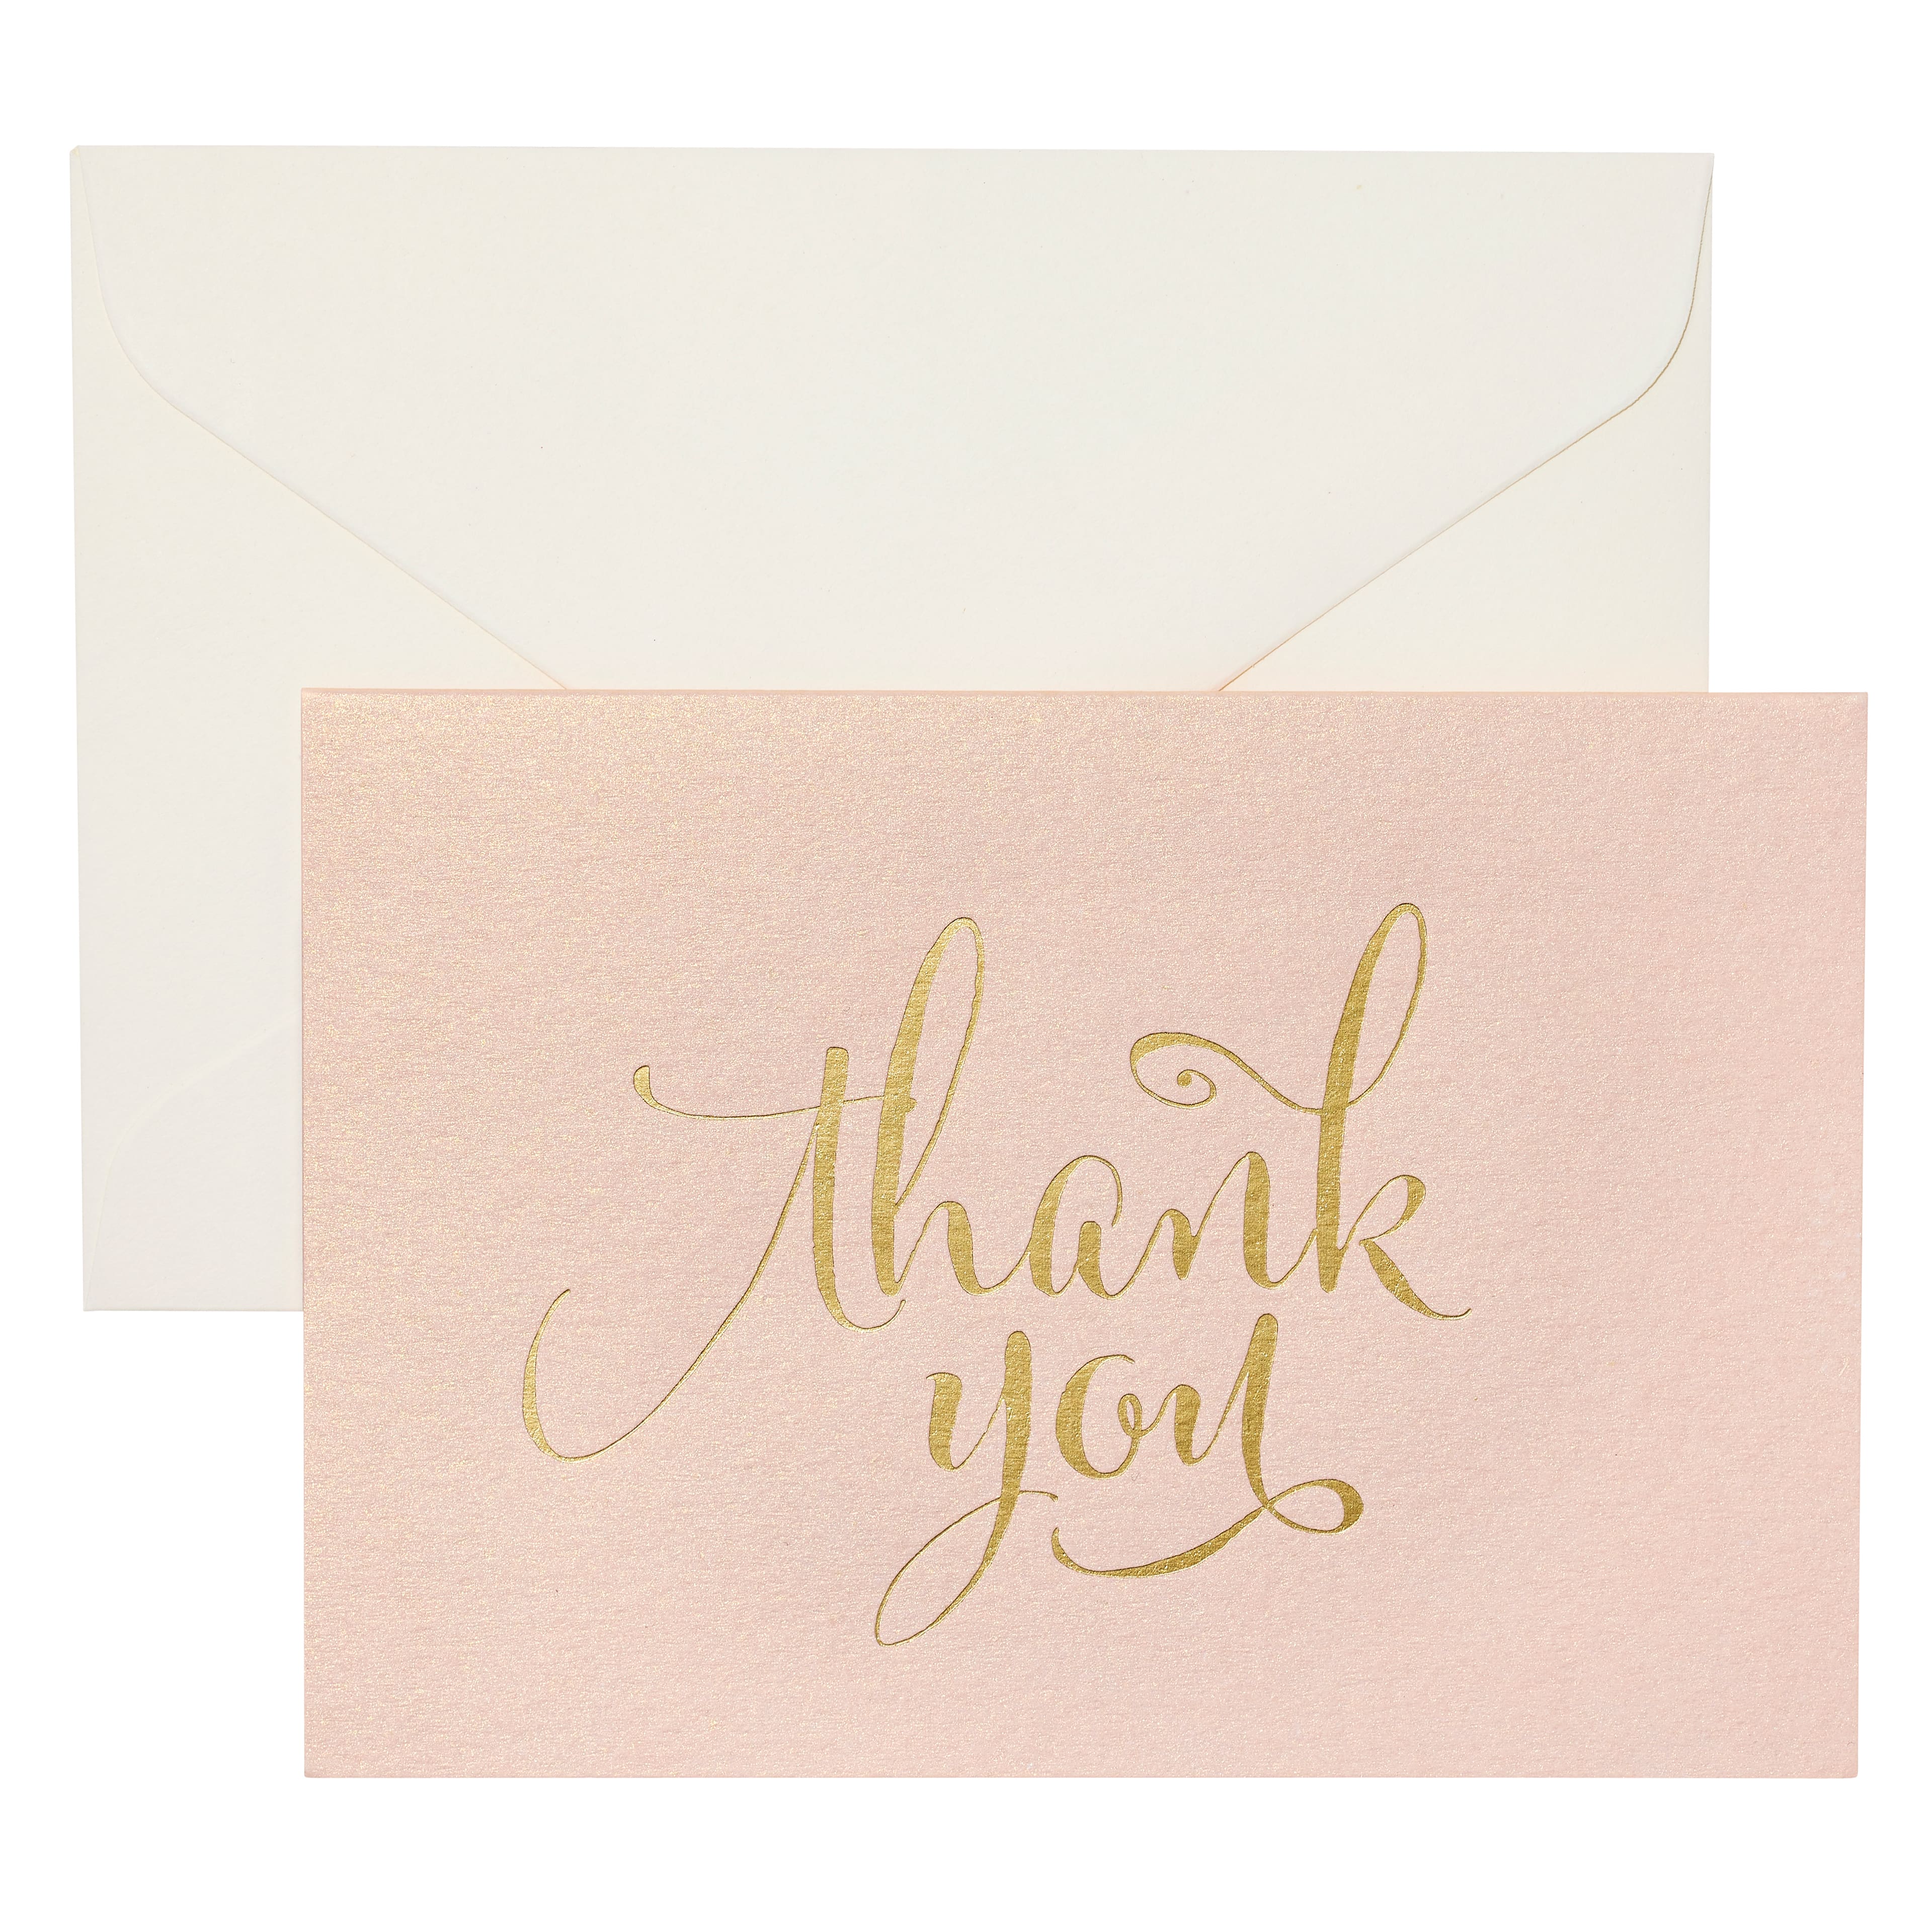 20-100 qty Personalised Wedding Thank You Cards silhouette 